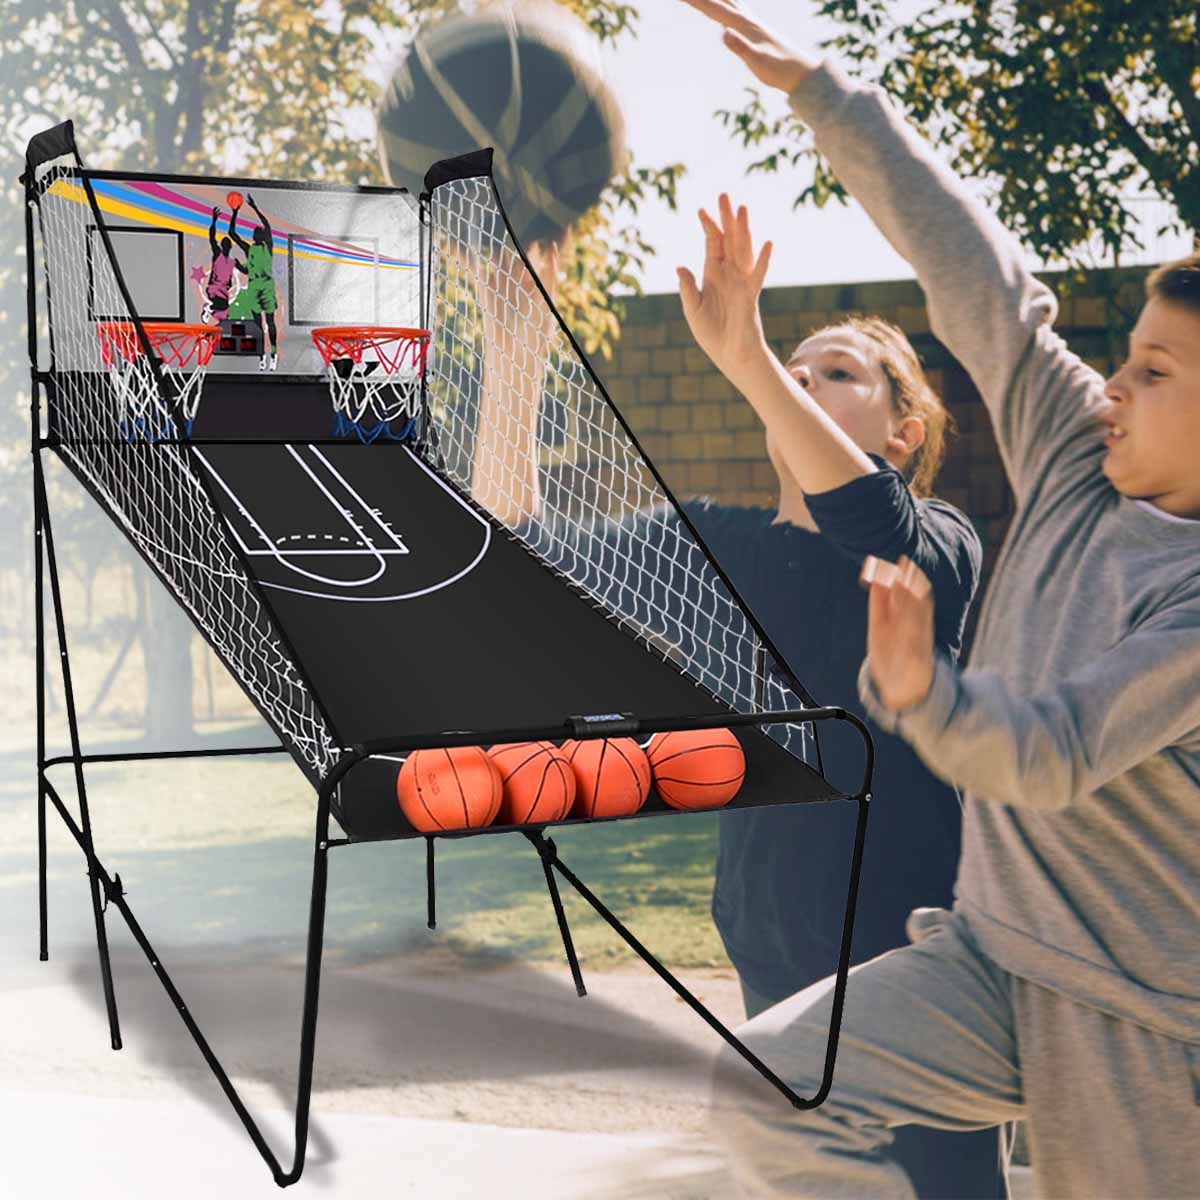 Get Active and Competitive with 8-in-1 Hoop Arcade Game